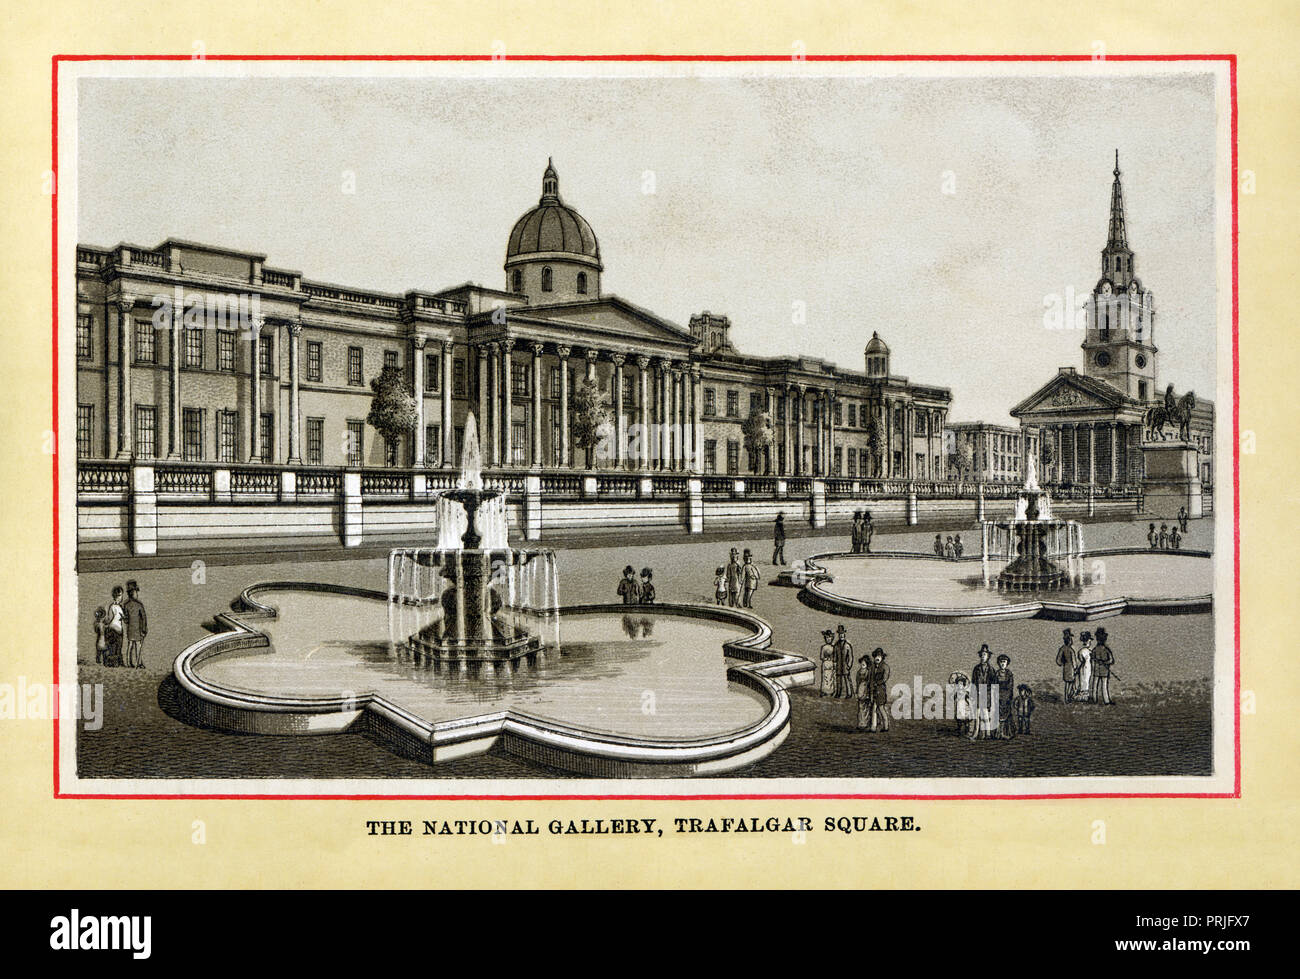 The National Gallery, 1883 high quality steel engraving of the nation’s art gallery, completed in 1838, in the centre of London, Trafalgar Square, next to the church of St Martin in the Fields Stock Photo